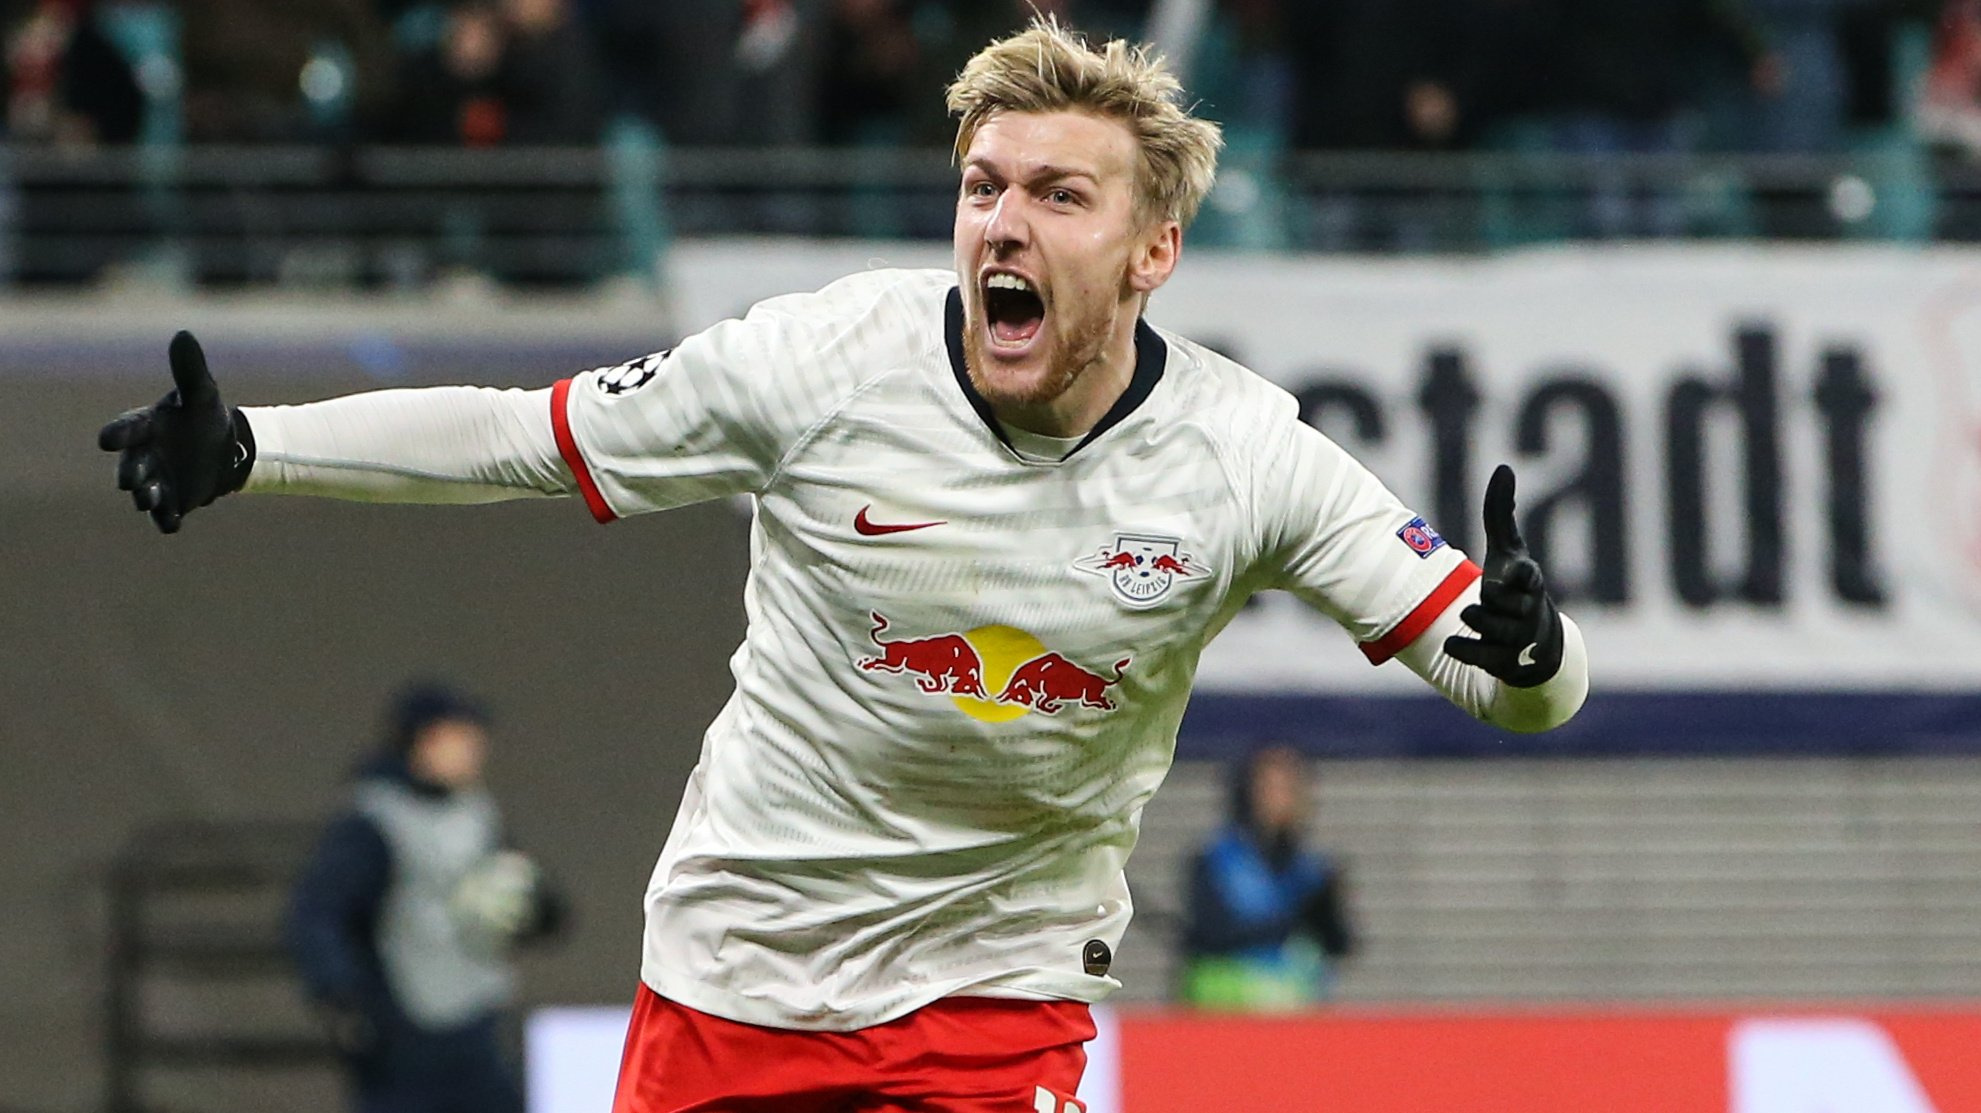 Emil Forsberg Kind : Emil Forsberg Stock Pictures Editorial Images And Stock Photos Shutterstock ...